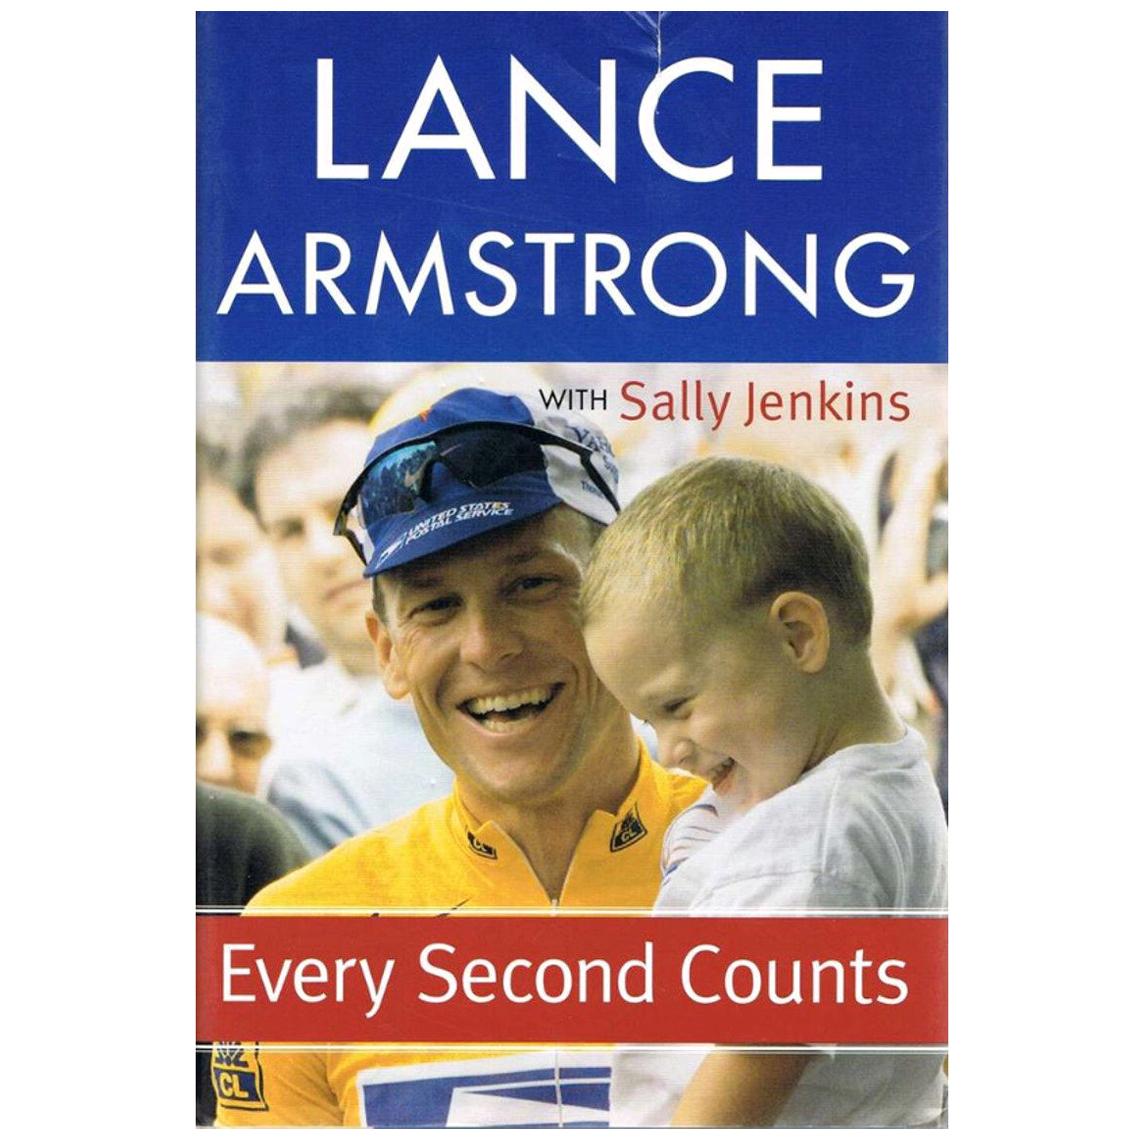 Lance Armstrong Autograph on a Copy of His Autobiography, 21st Century